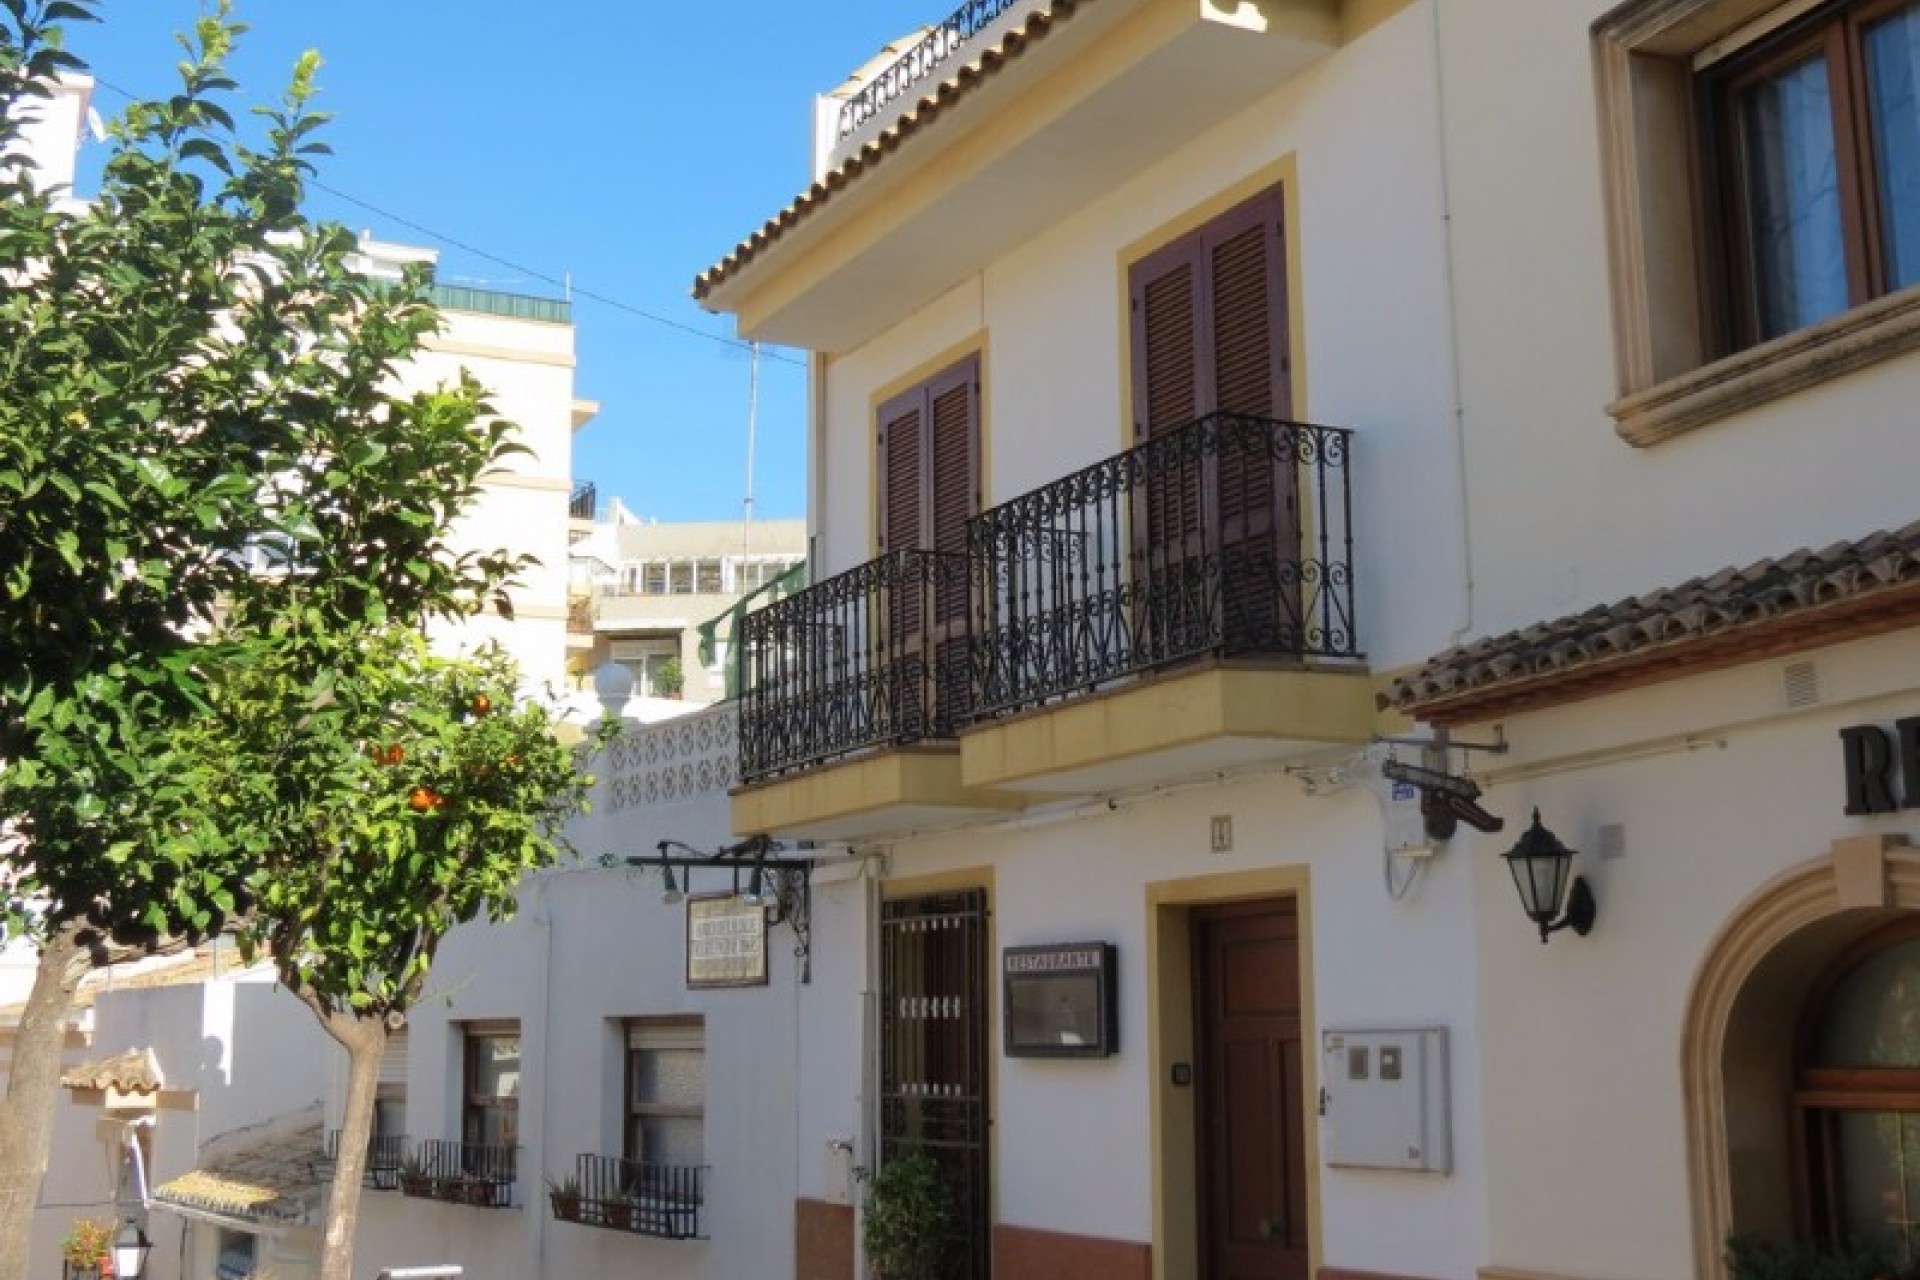 Commercial Premises For Sale in Calpe, Alicante